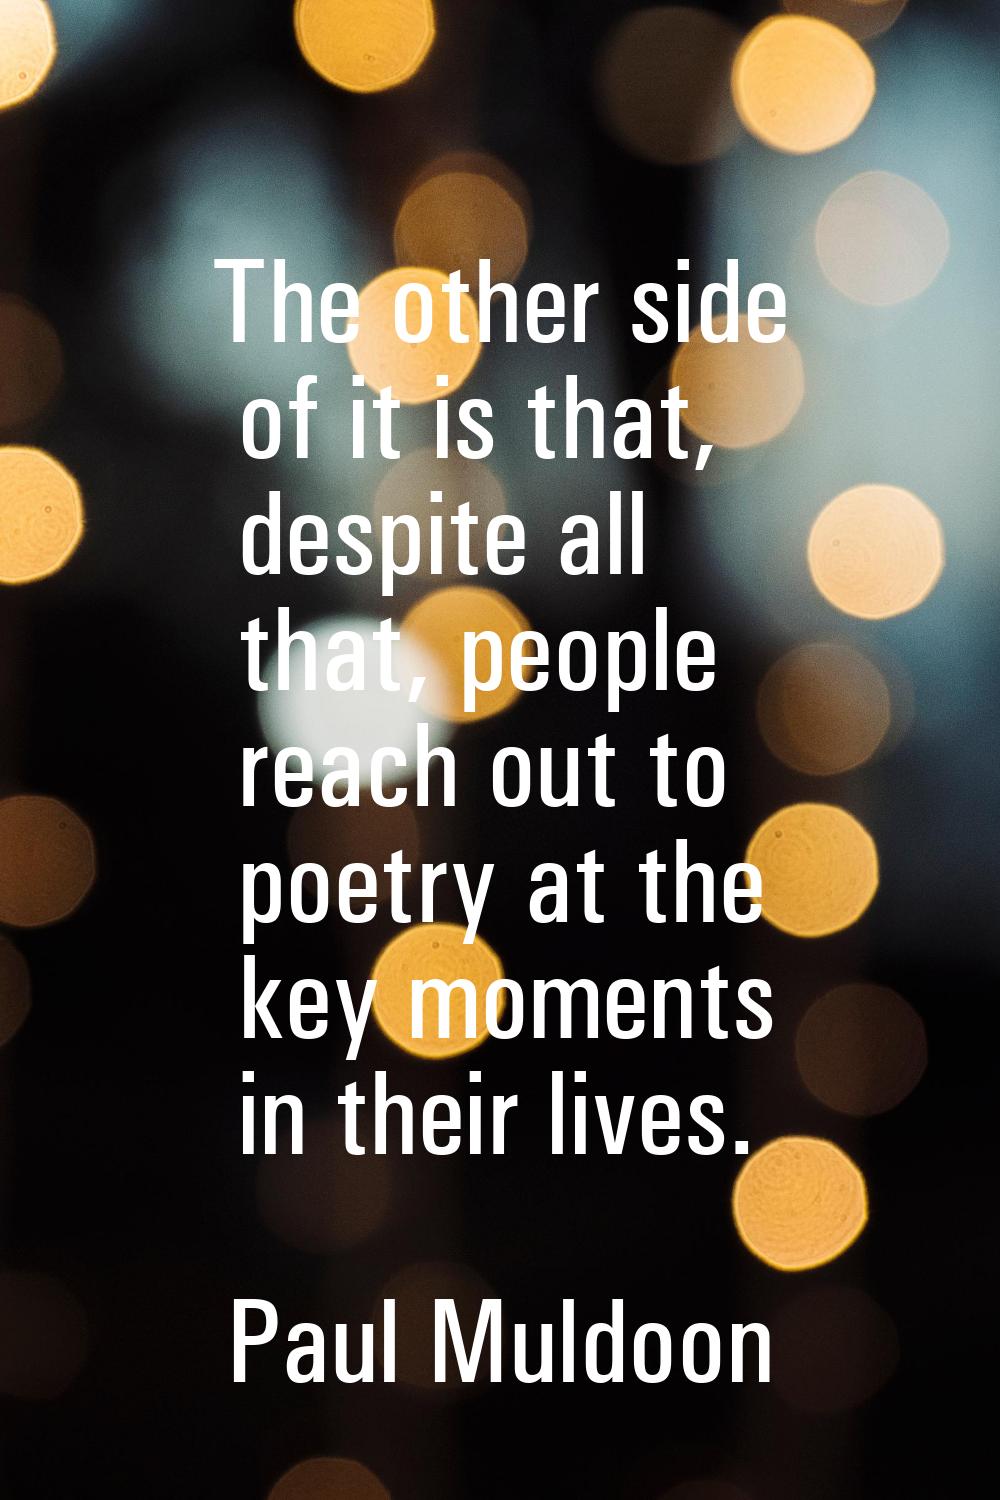 The other side of it is that, despite all that, people reach out to poetry at the key moments in th